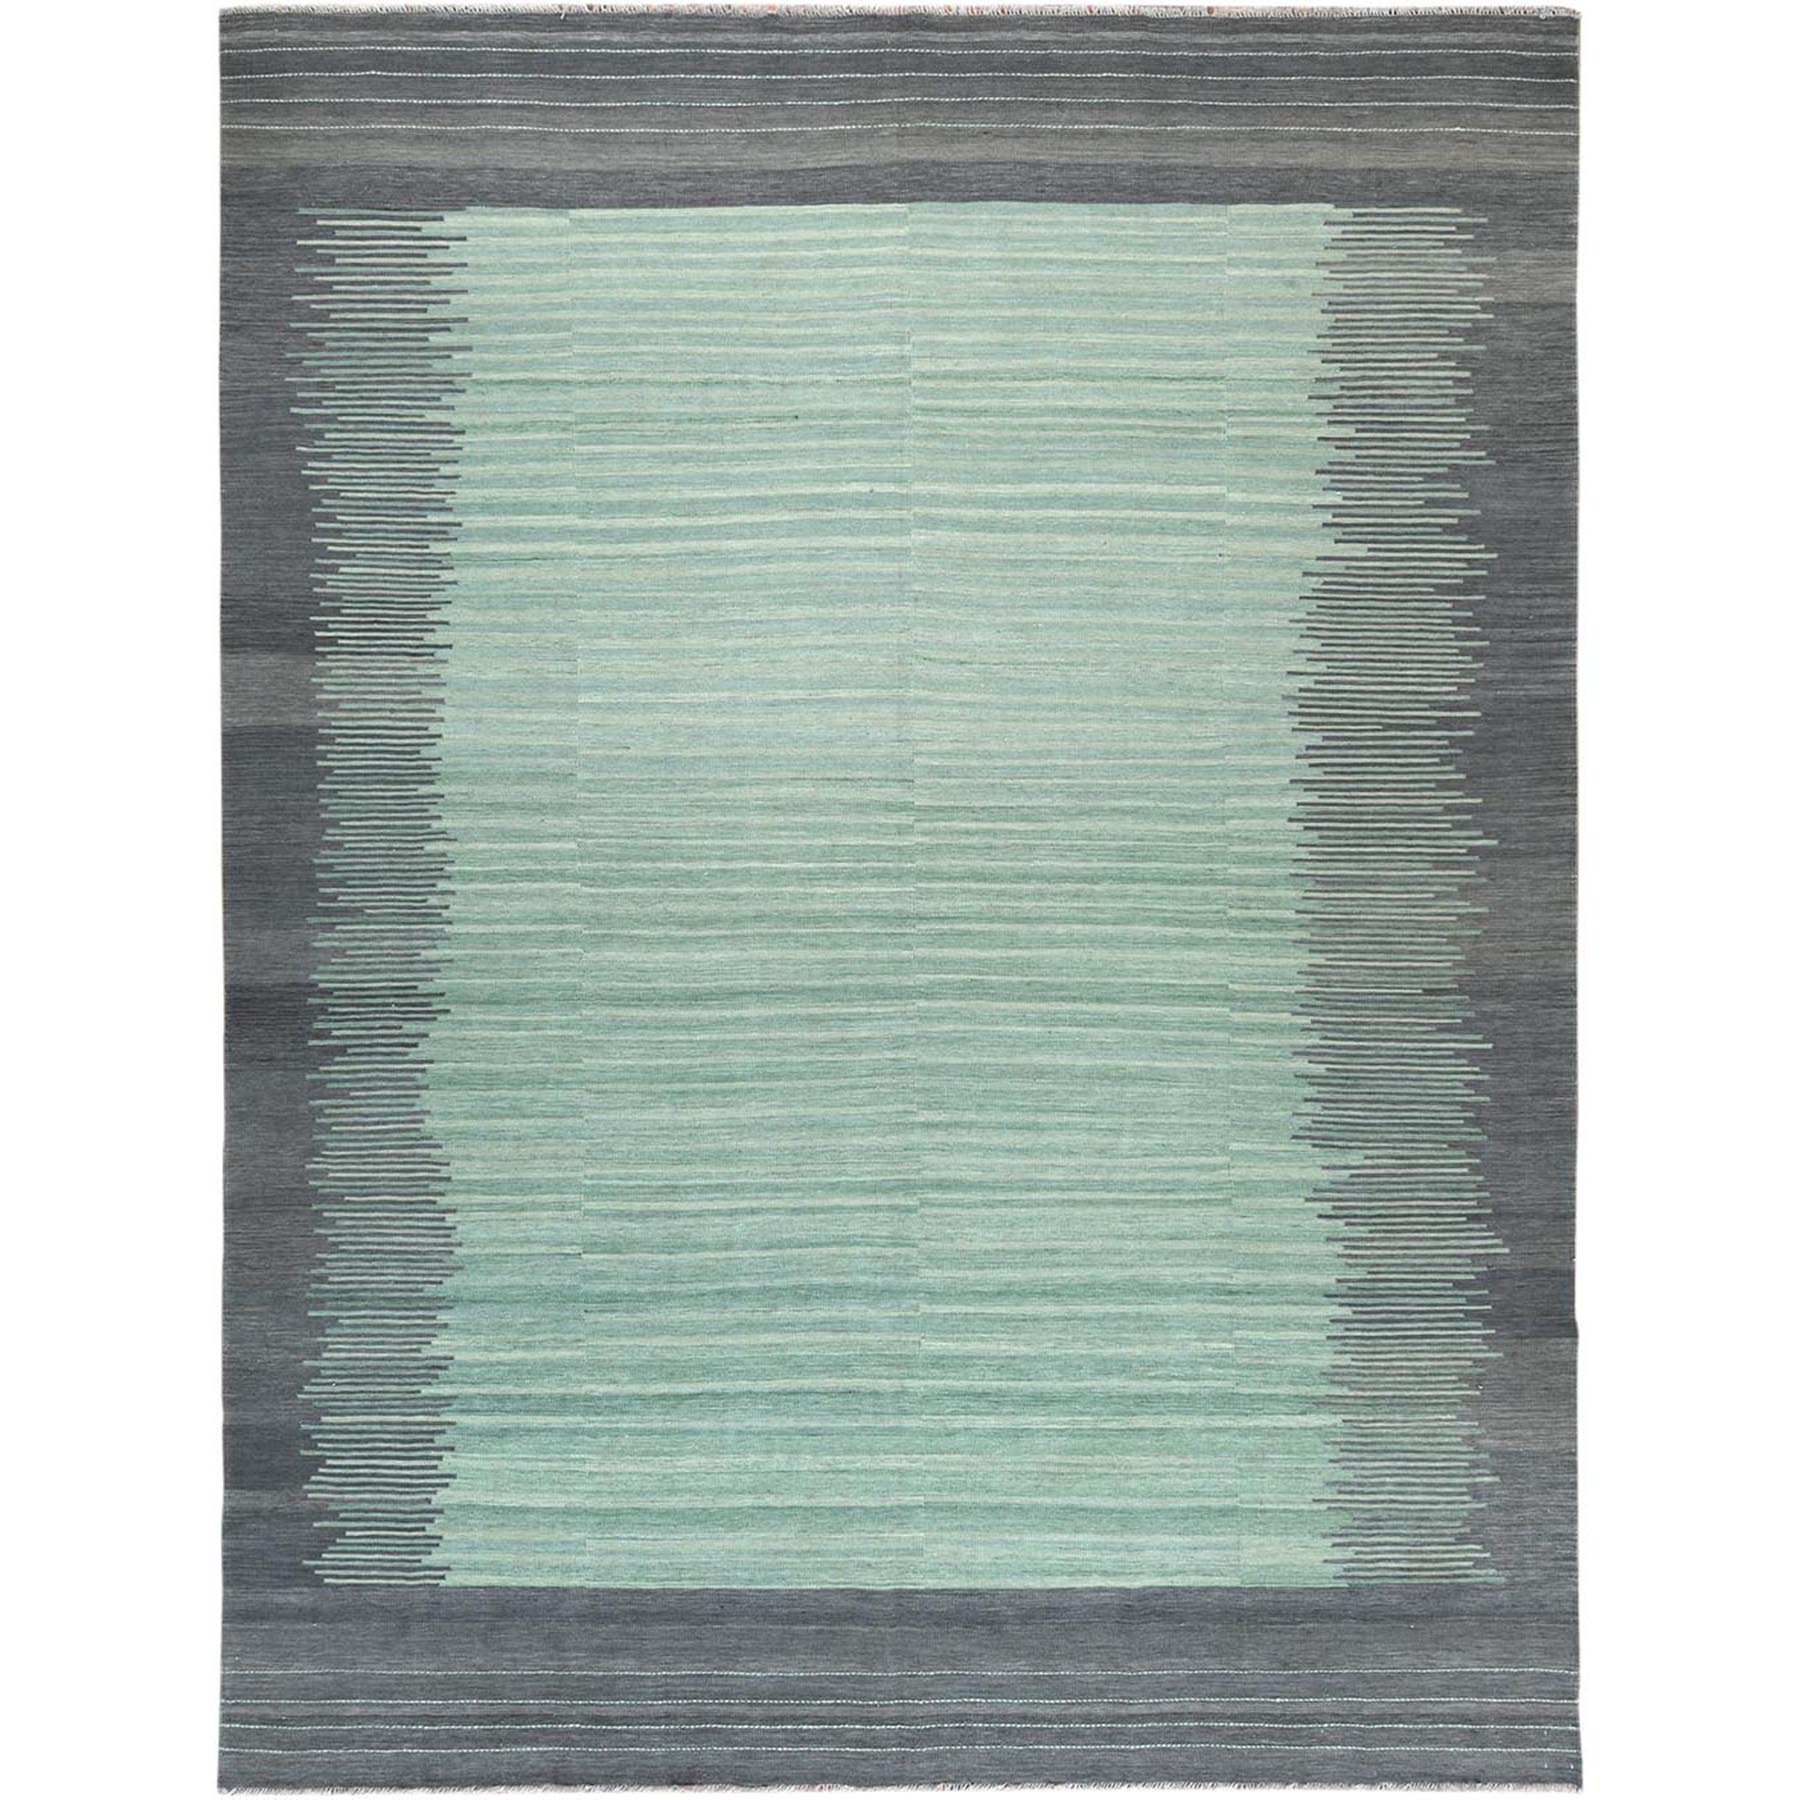 Modern & Contemporary Wool Hand-Woven Area Rug 9'3